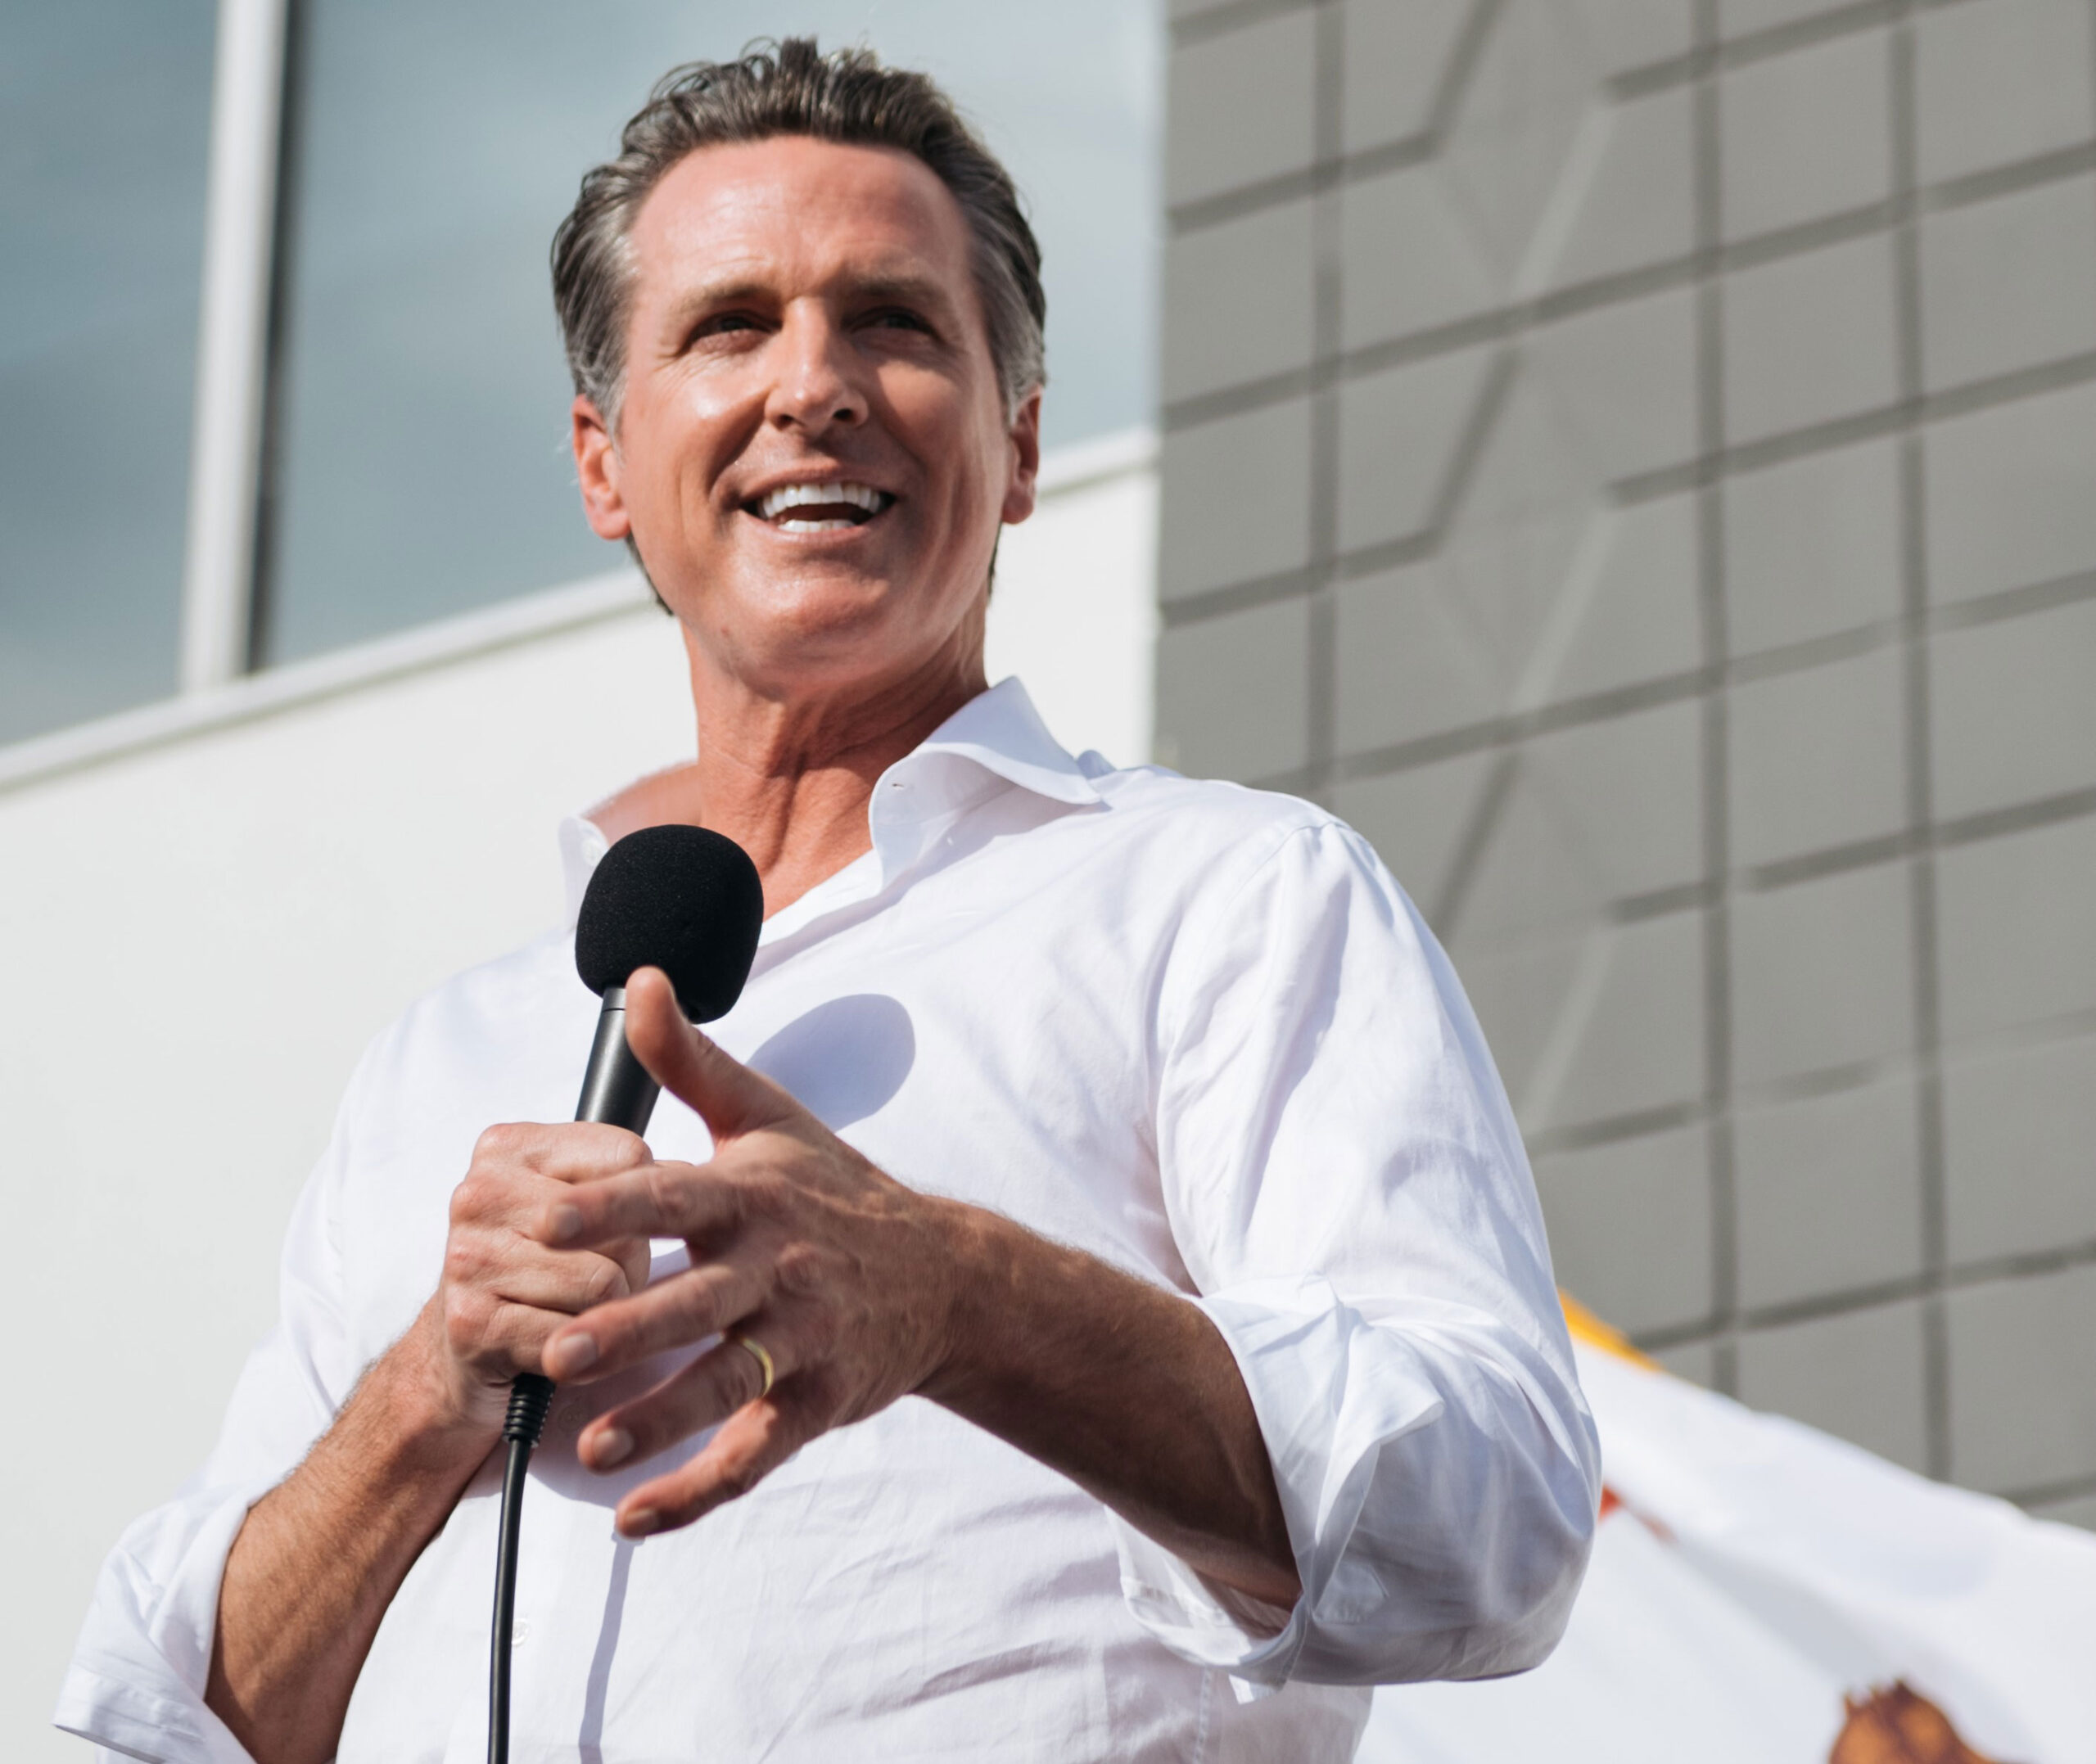 Governor Gavin Newsom, a medium skin toned white man with salt and pepper hair, wears a white button down shirt with rolled sleeves smiles while holding a microphone. A part of the California flag is in the background.